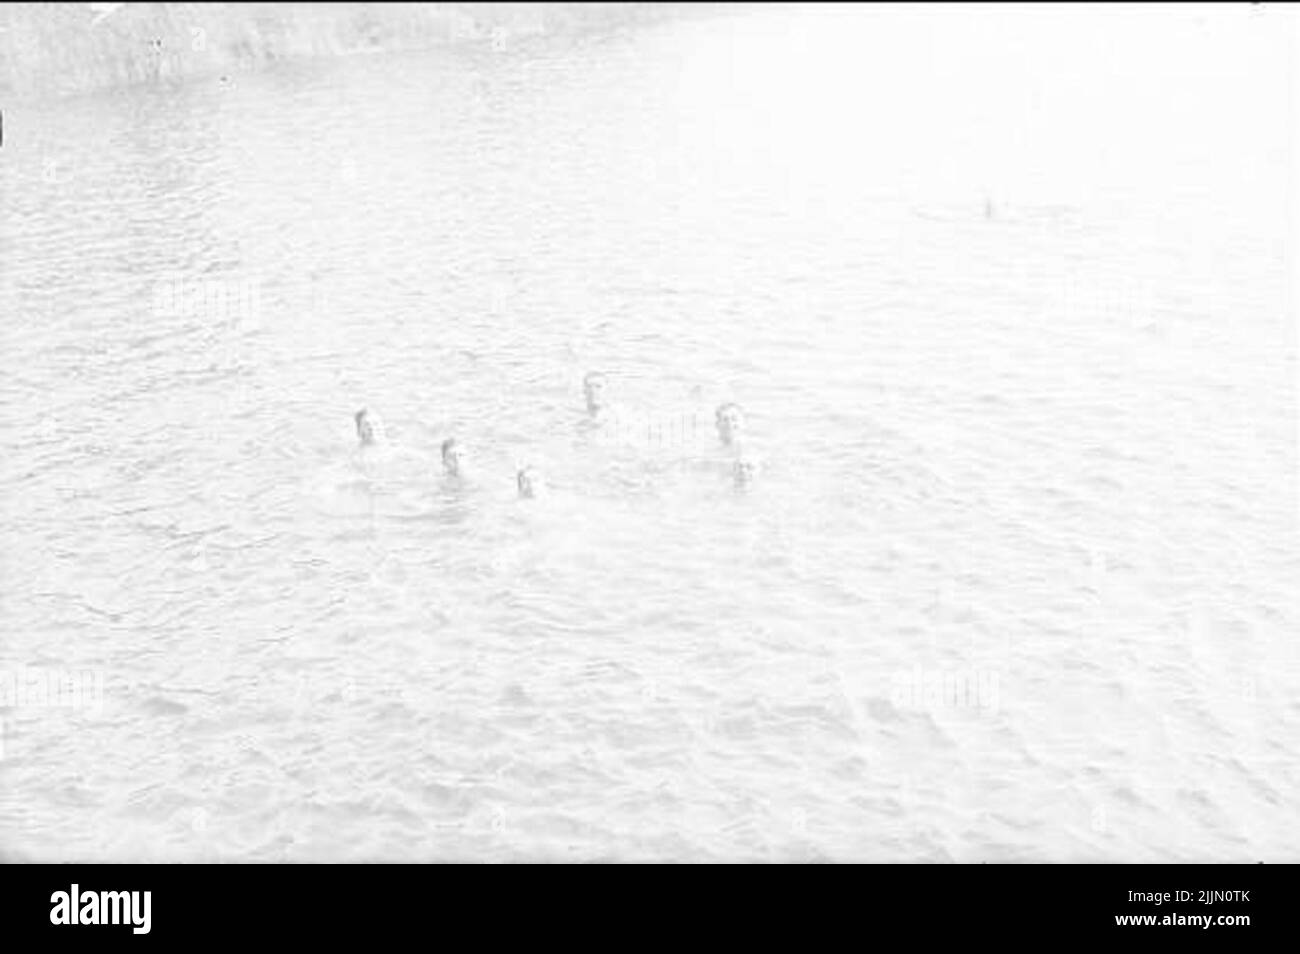 4. Squadron bath and swimming lessons in Lake Sjötorp. Stock Photo